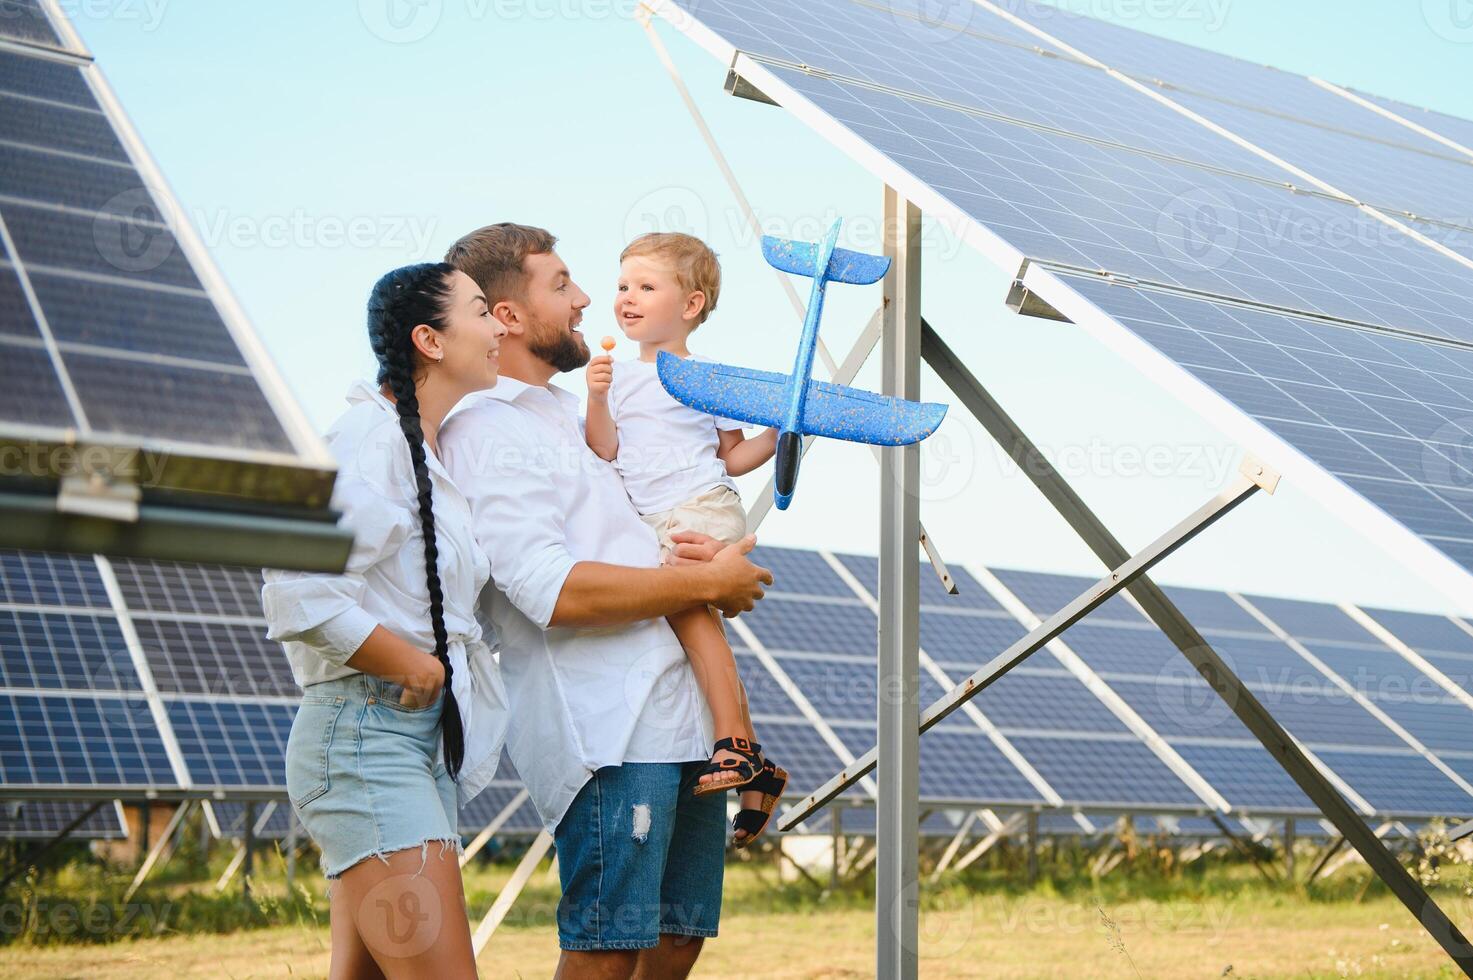 A wide shot of a happy family standing together and smiling at camera with a large solar panel in background photo